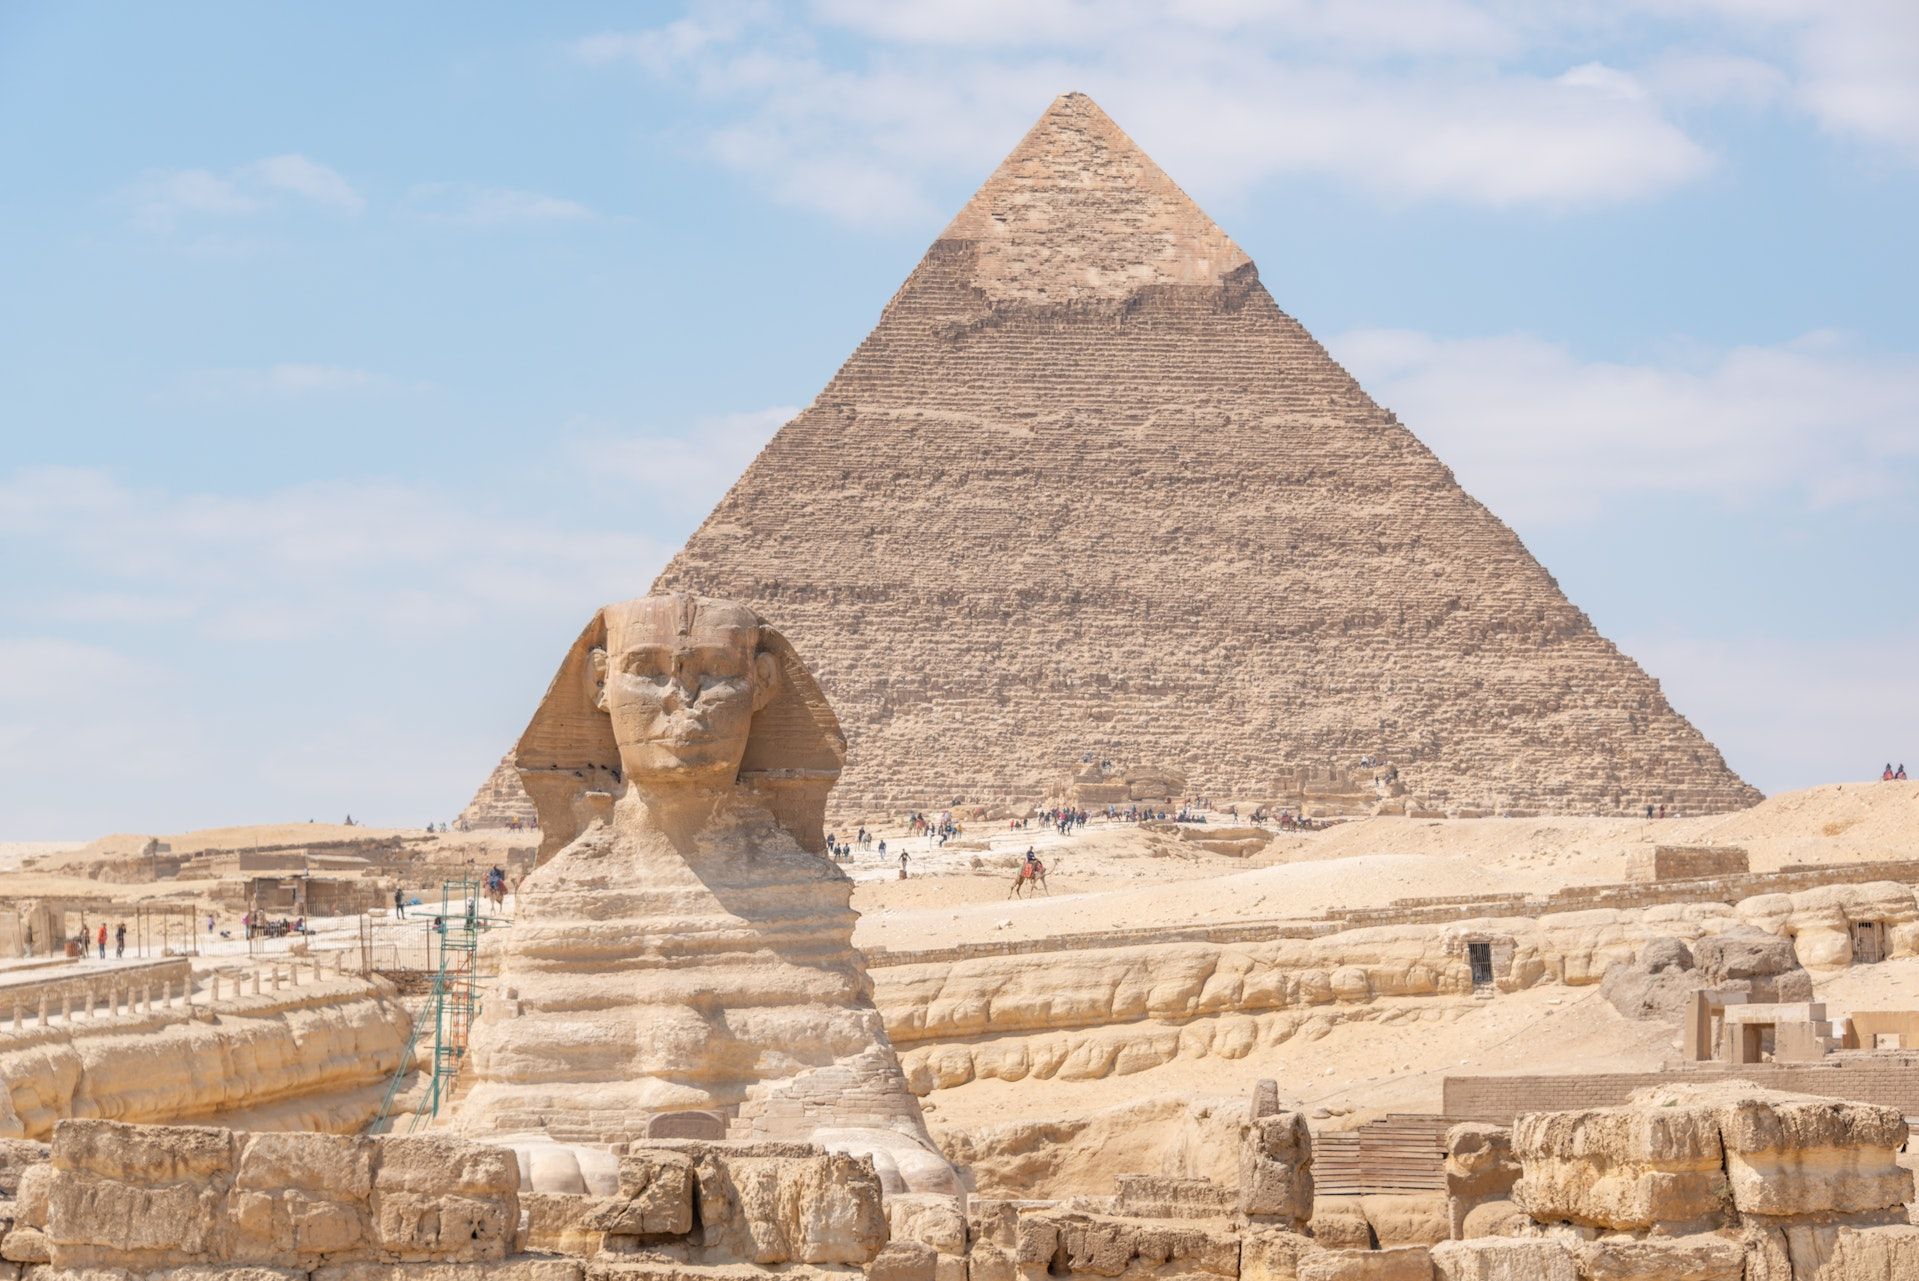 The regal Great Sphinx of Giza is located in the Giza Plateau on the west bank of the Nile.